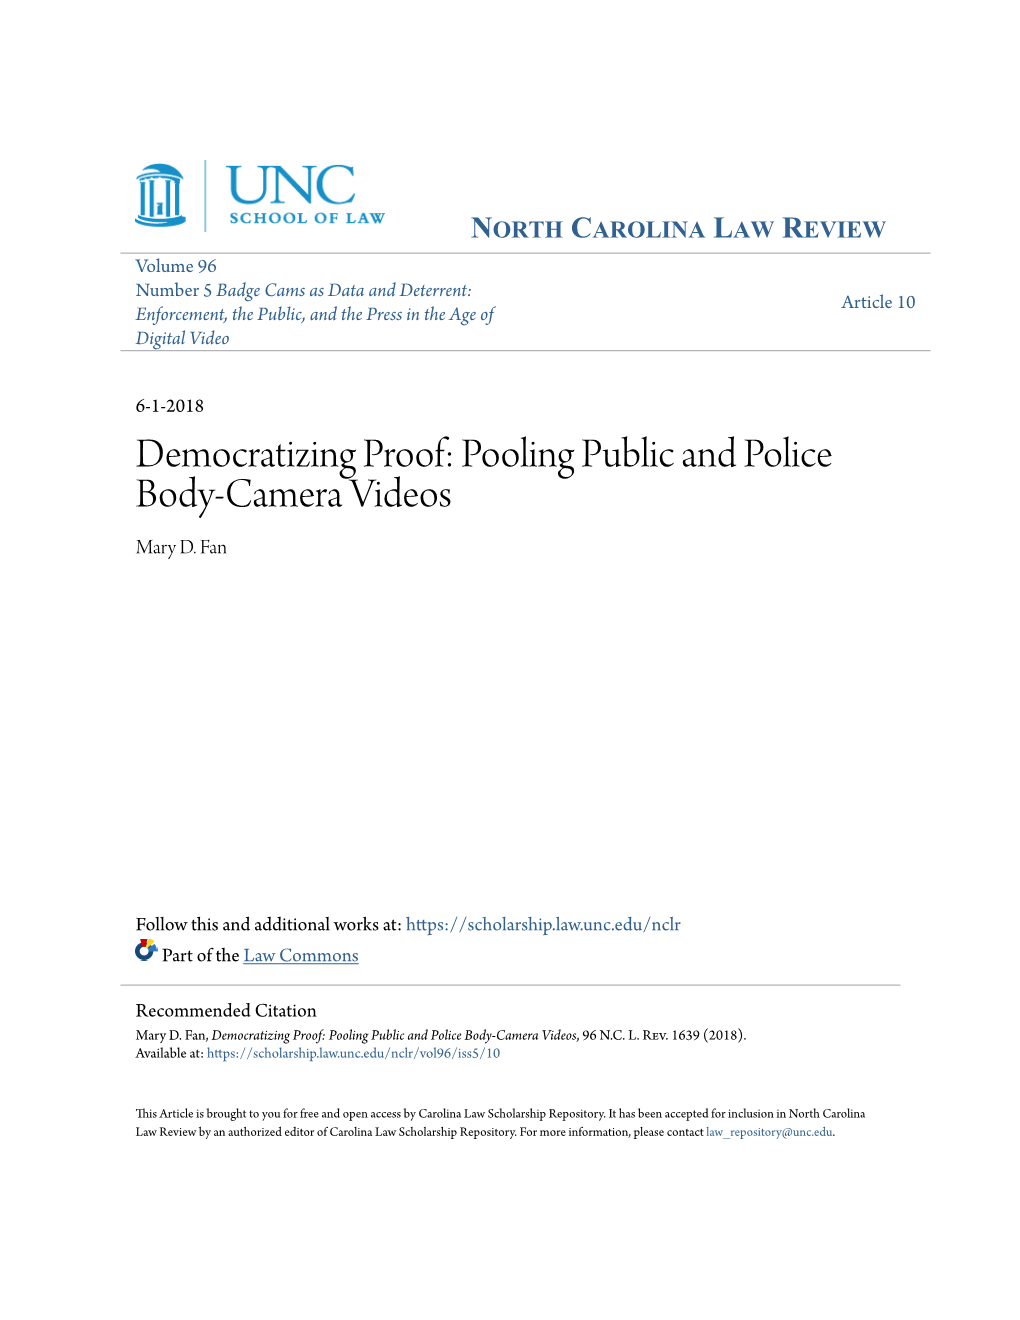 Democratizing Proof: Pooling Public and Police Body-Camera Videos Mary D